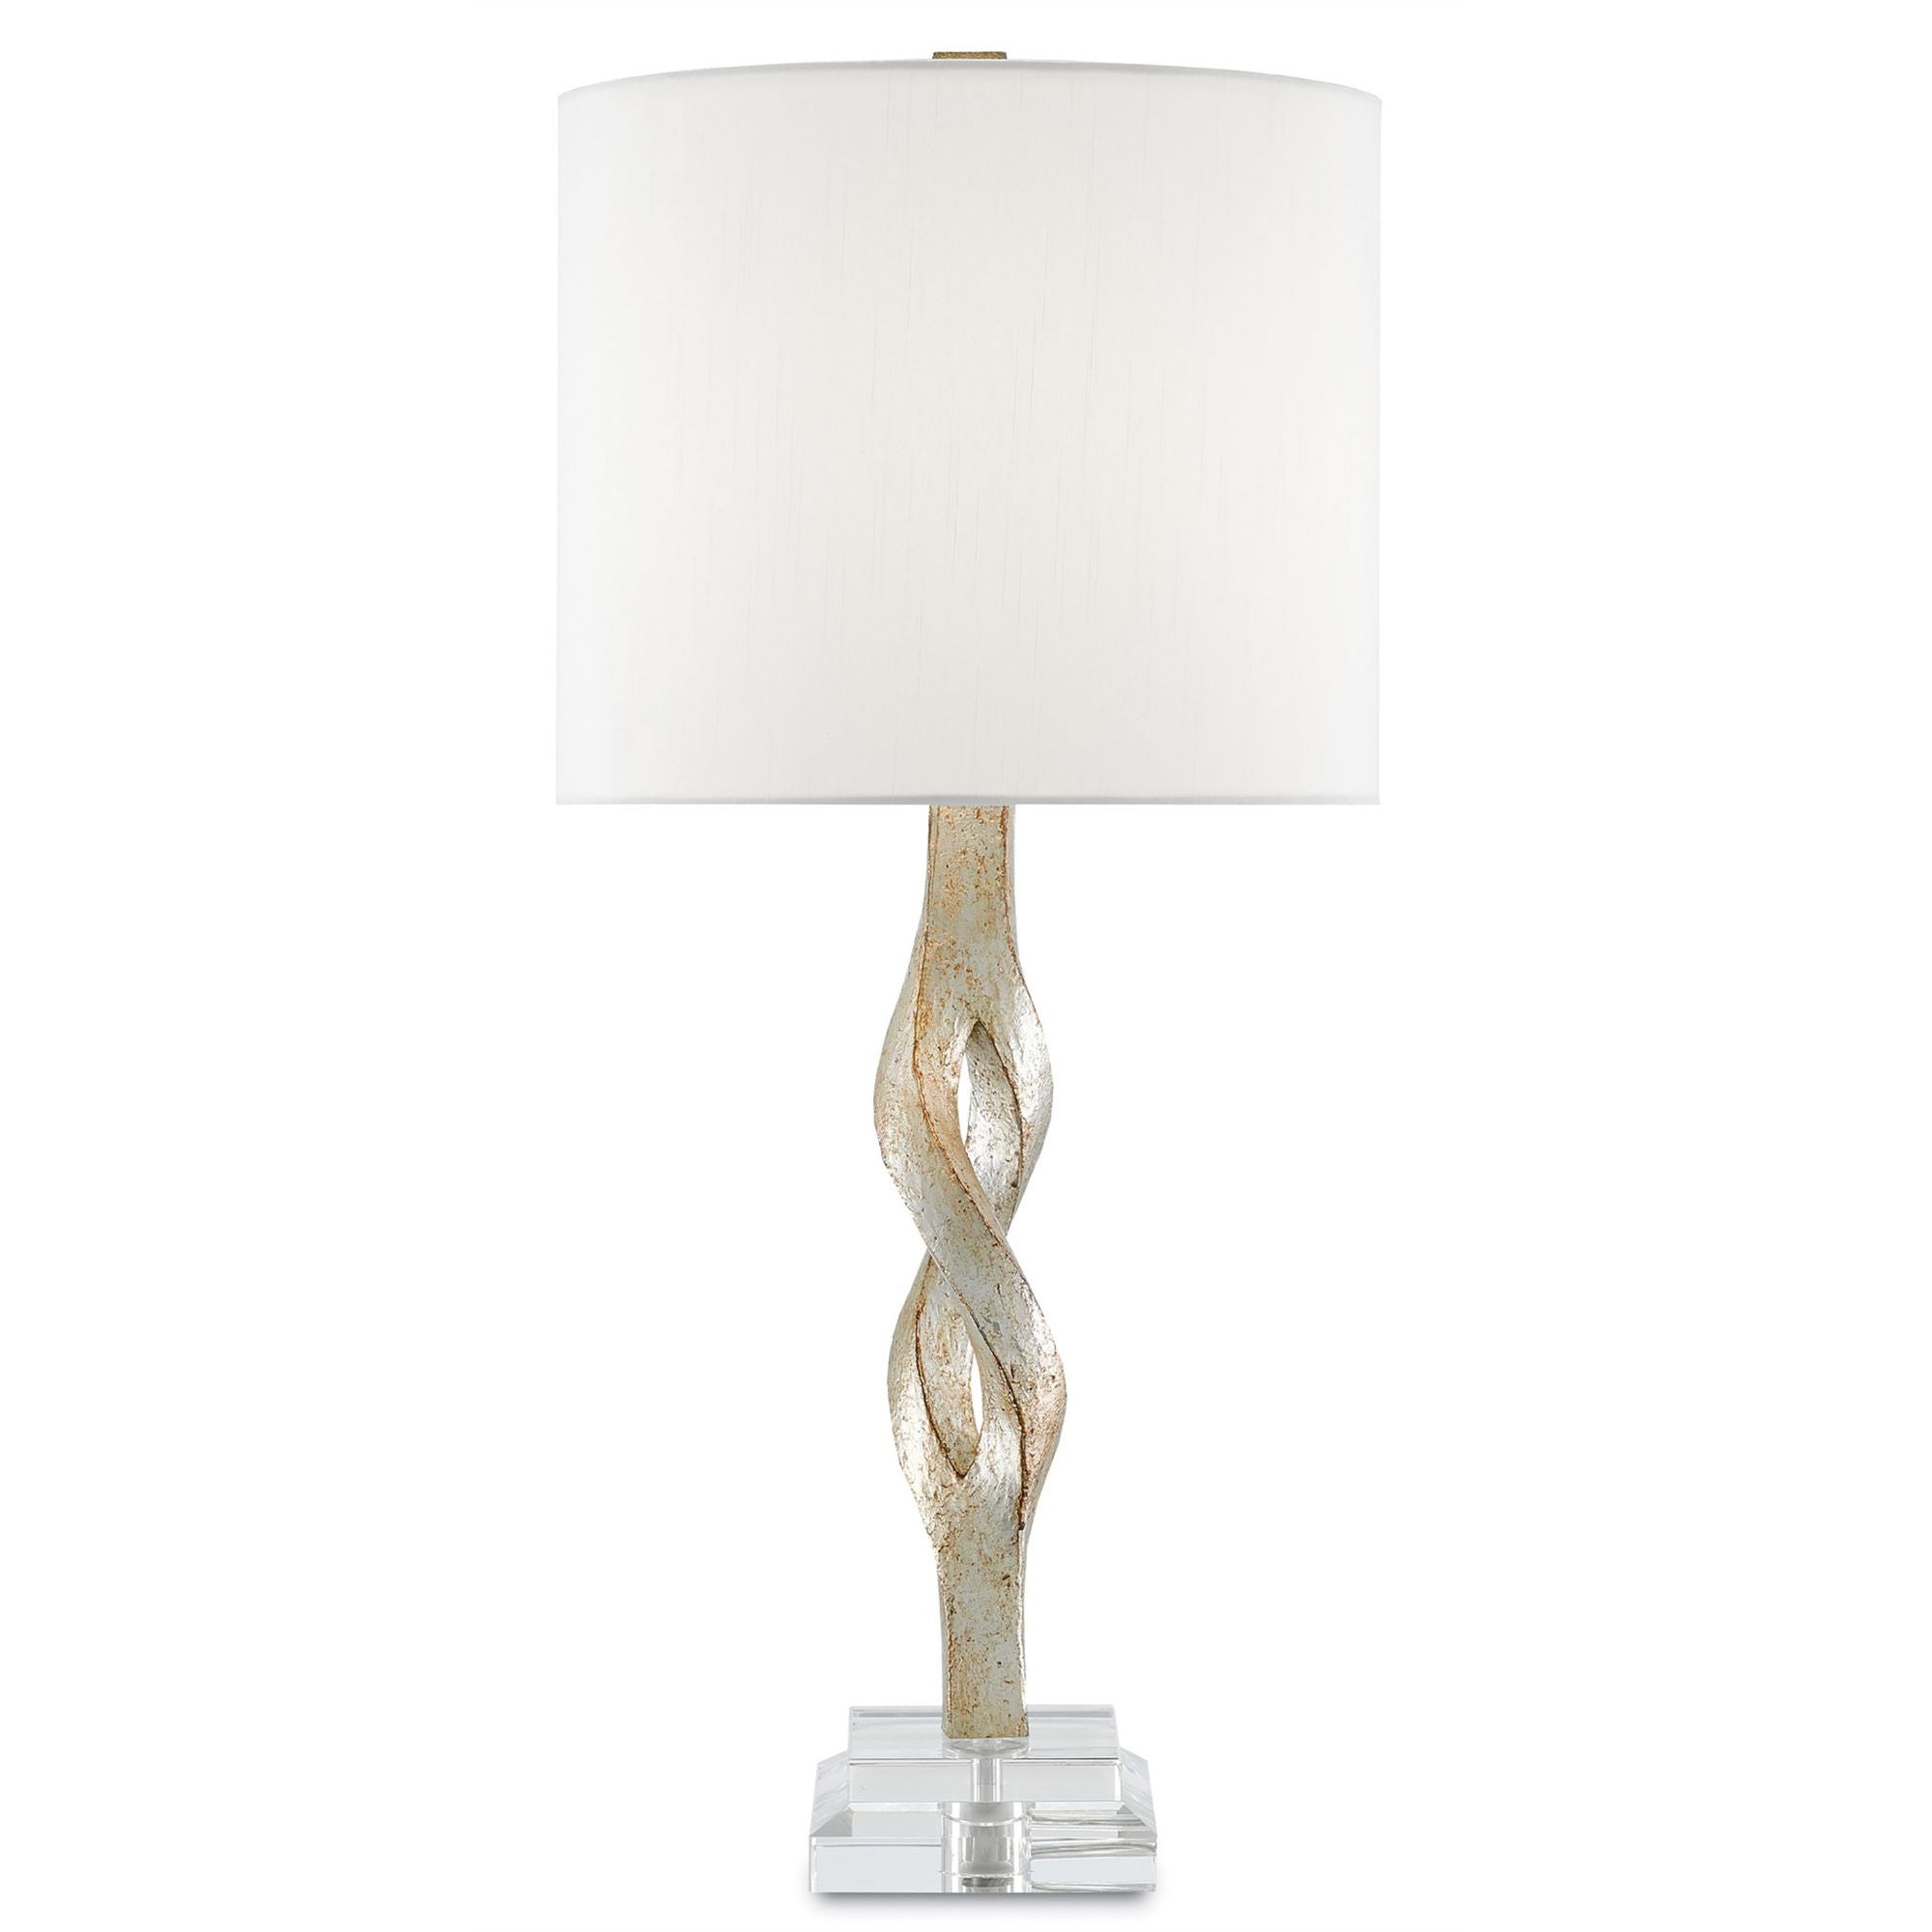 Elyx Silver Table Lamp - Chinois Silver Leaf